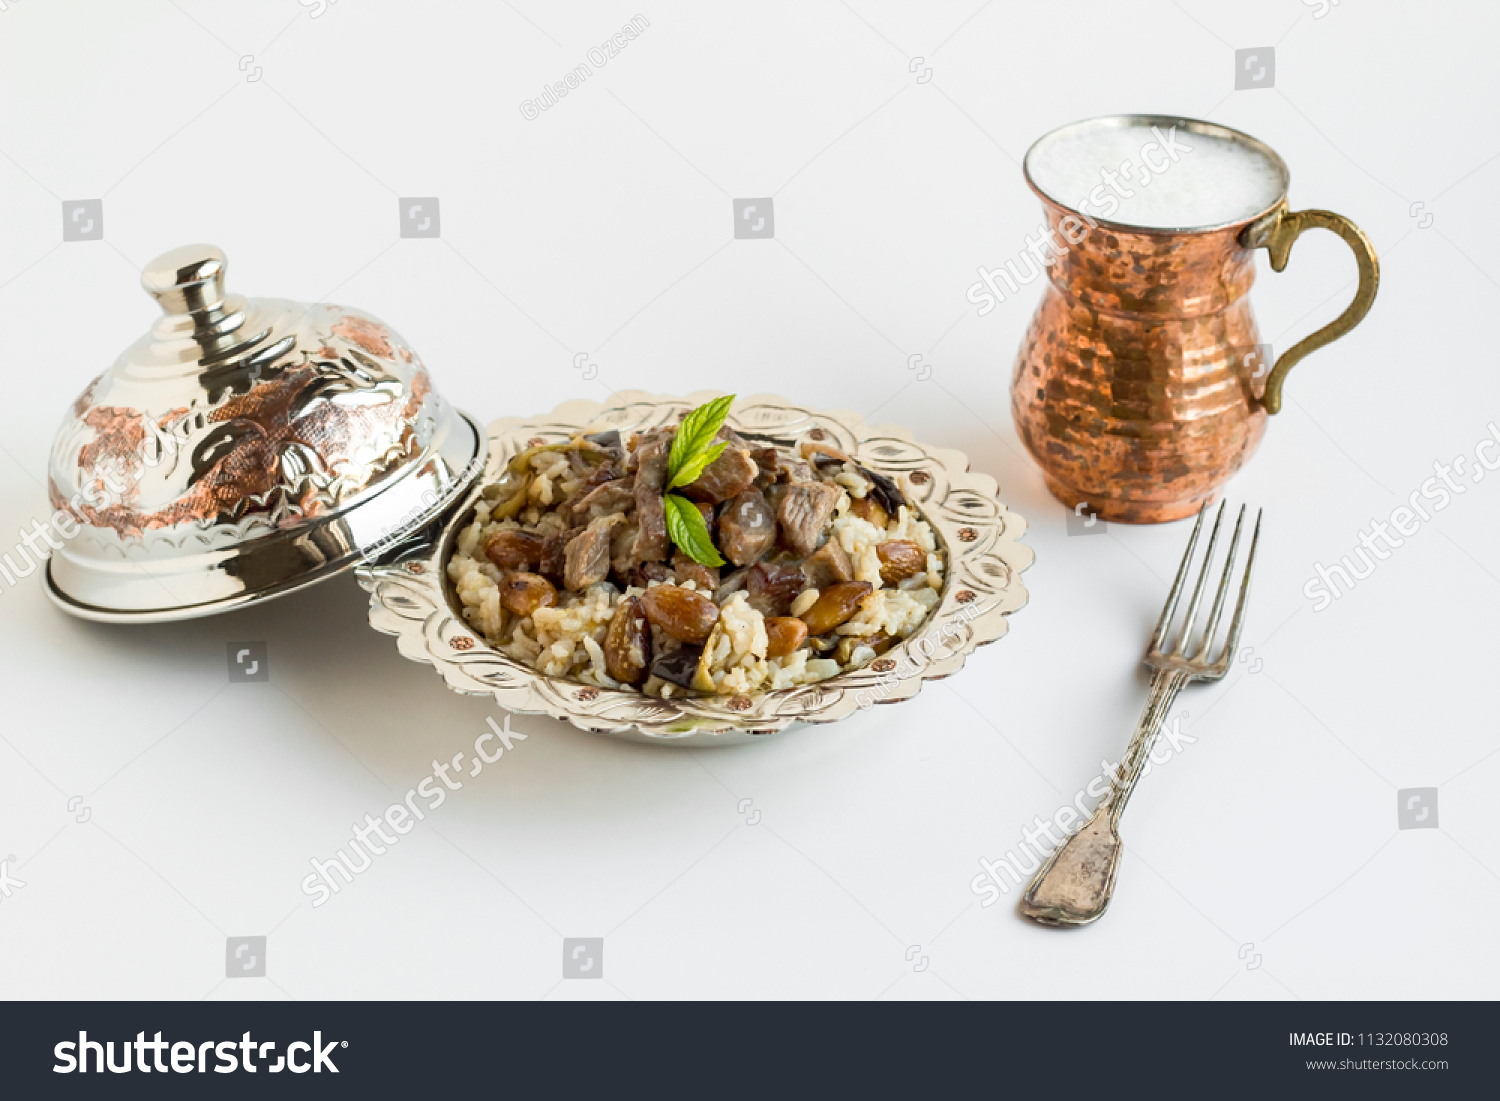 Traditional Turkish Islamic Festival,Food with braised meat,Kavurma and pilaff in vintage copper bowl on white with drink and fork #1132080308